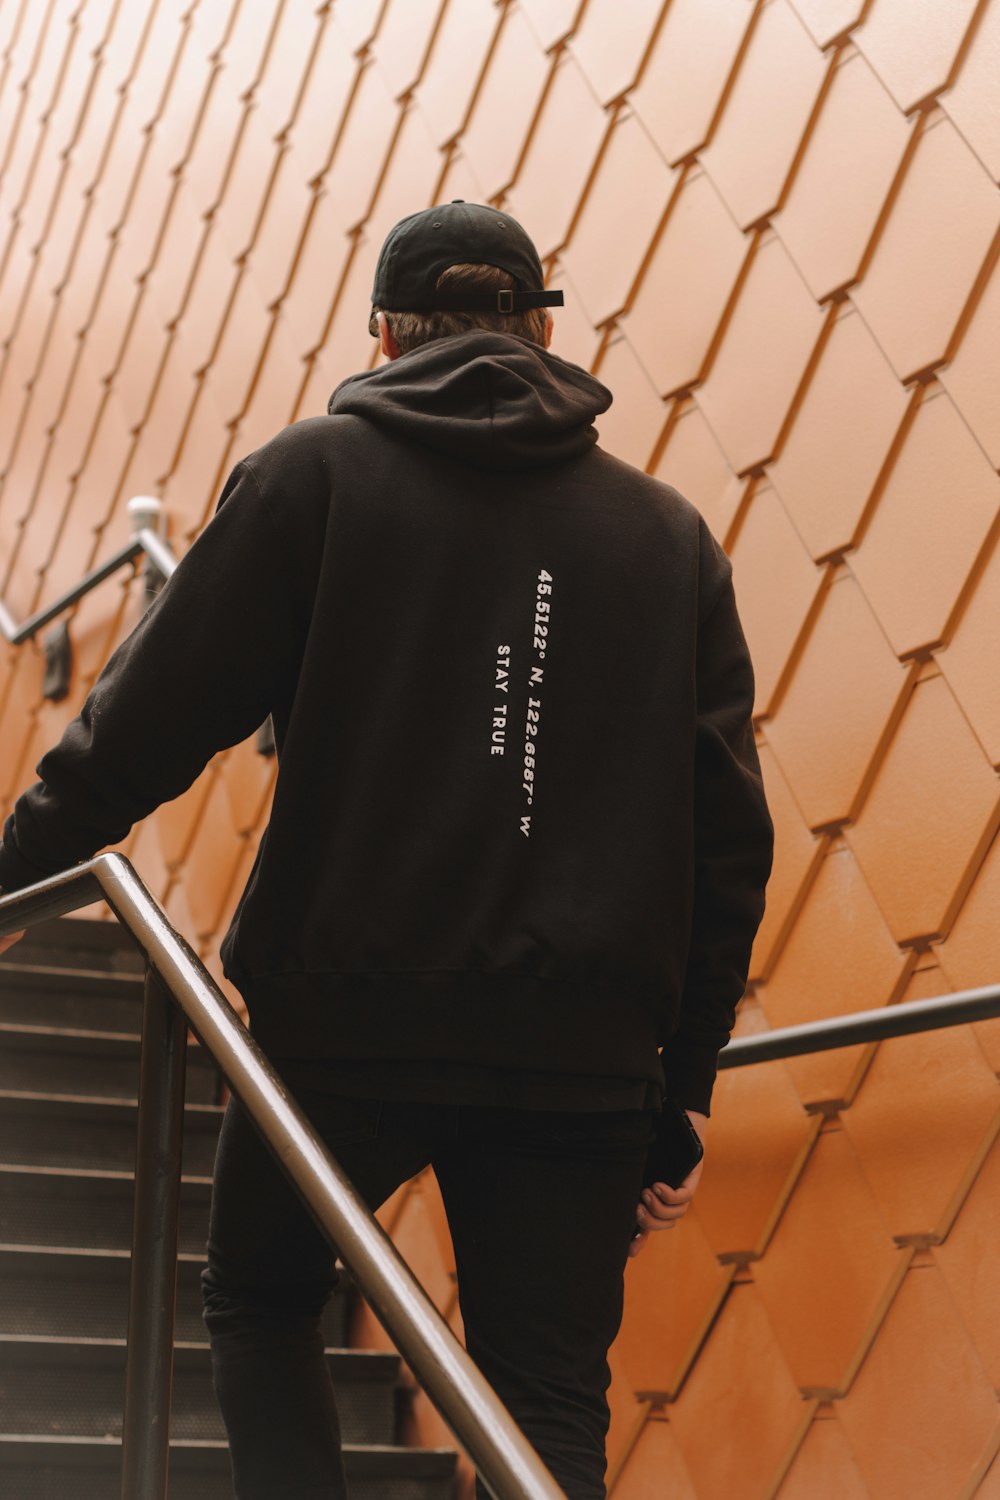 27+ Hoodie Pictures | Download Free Images & Stock Photos on Unsplash